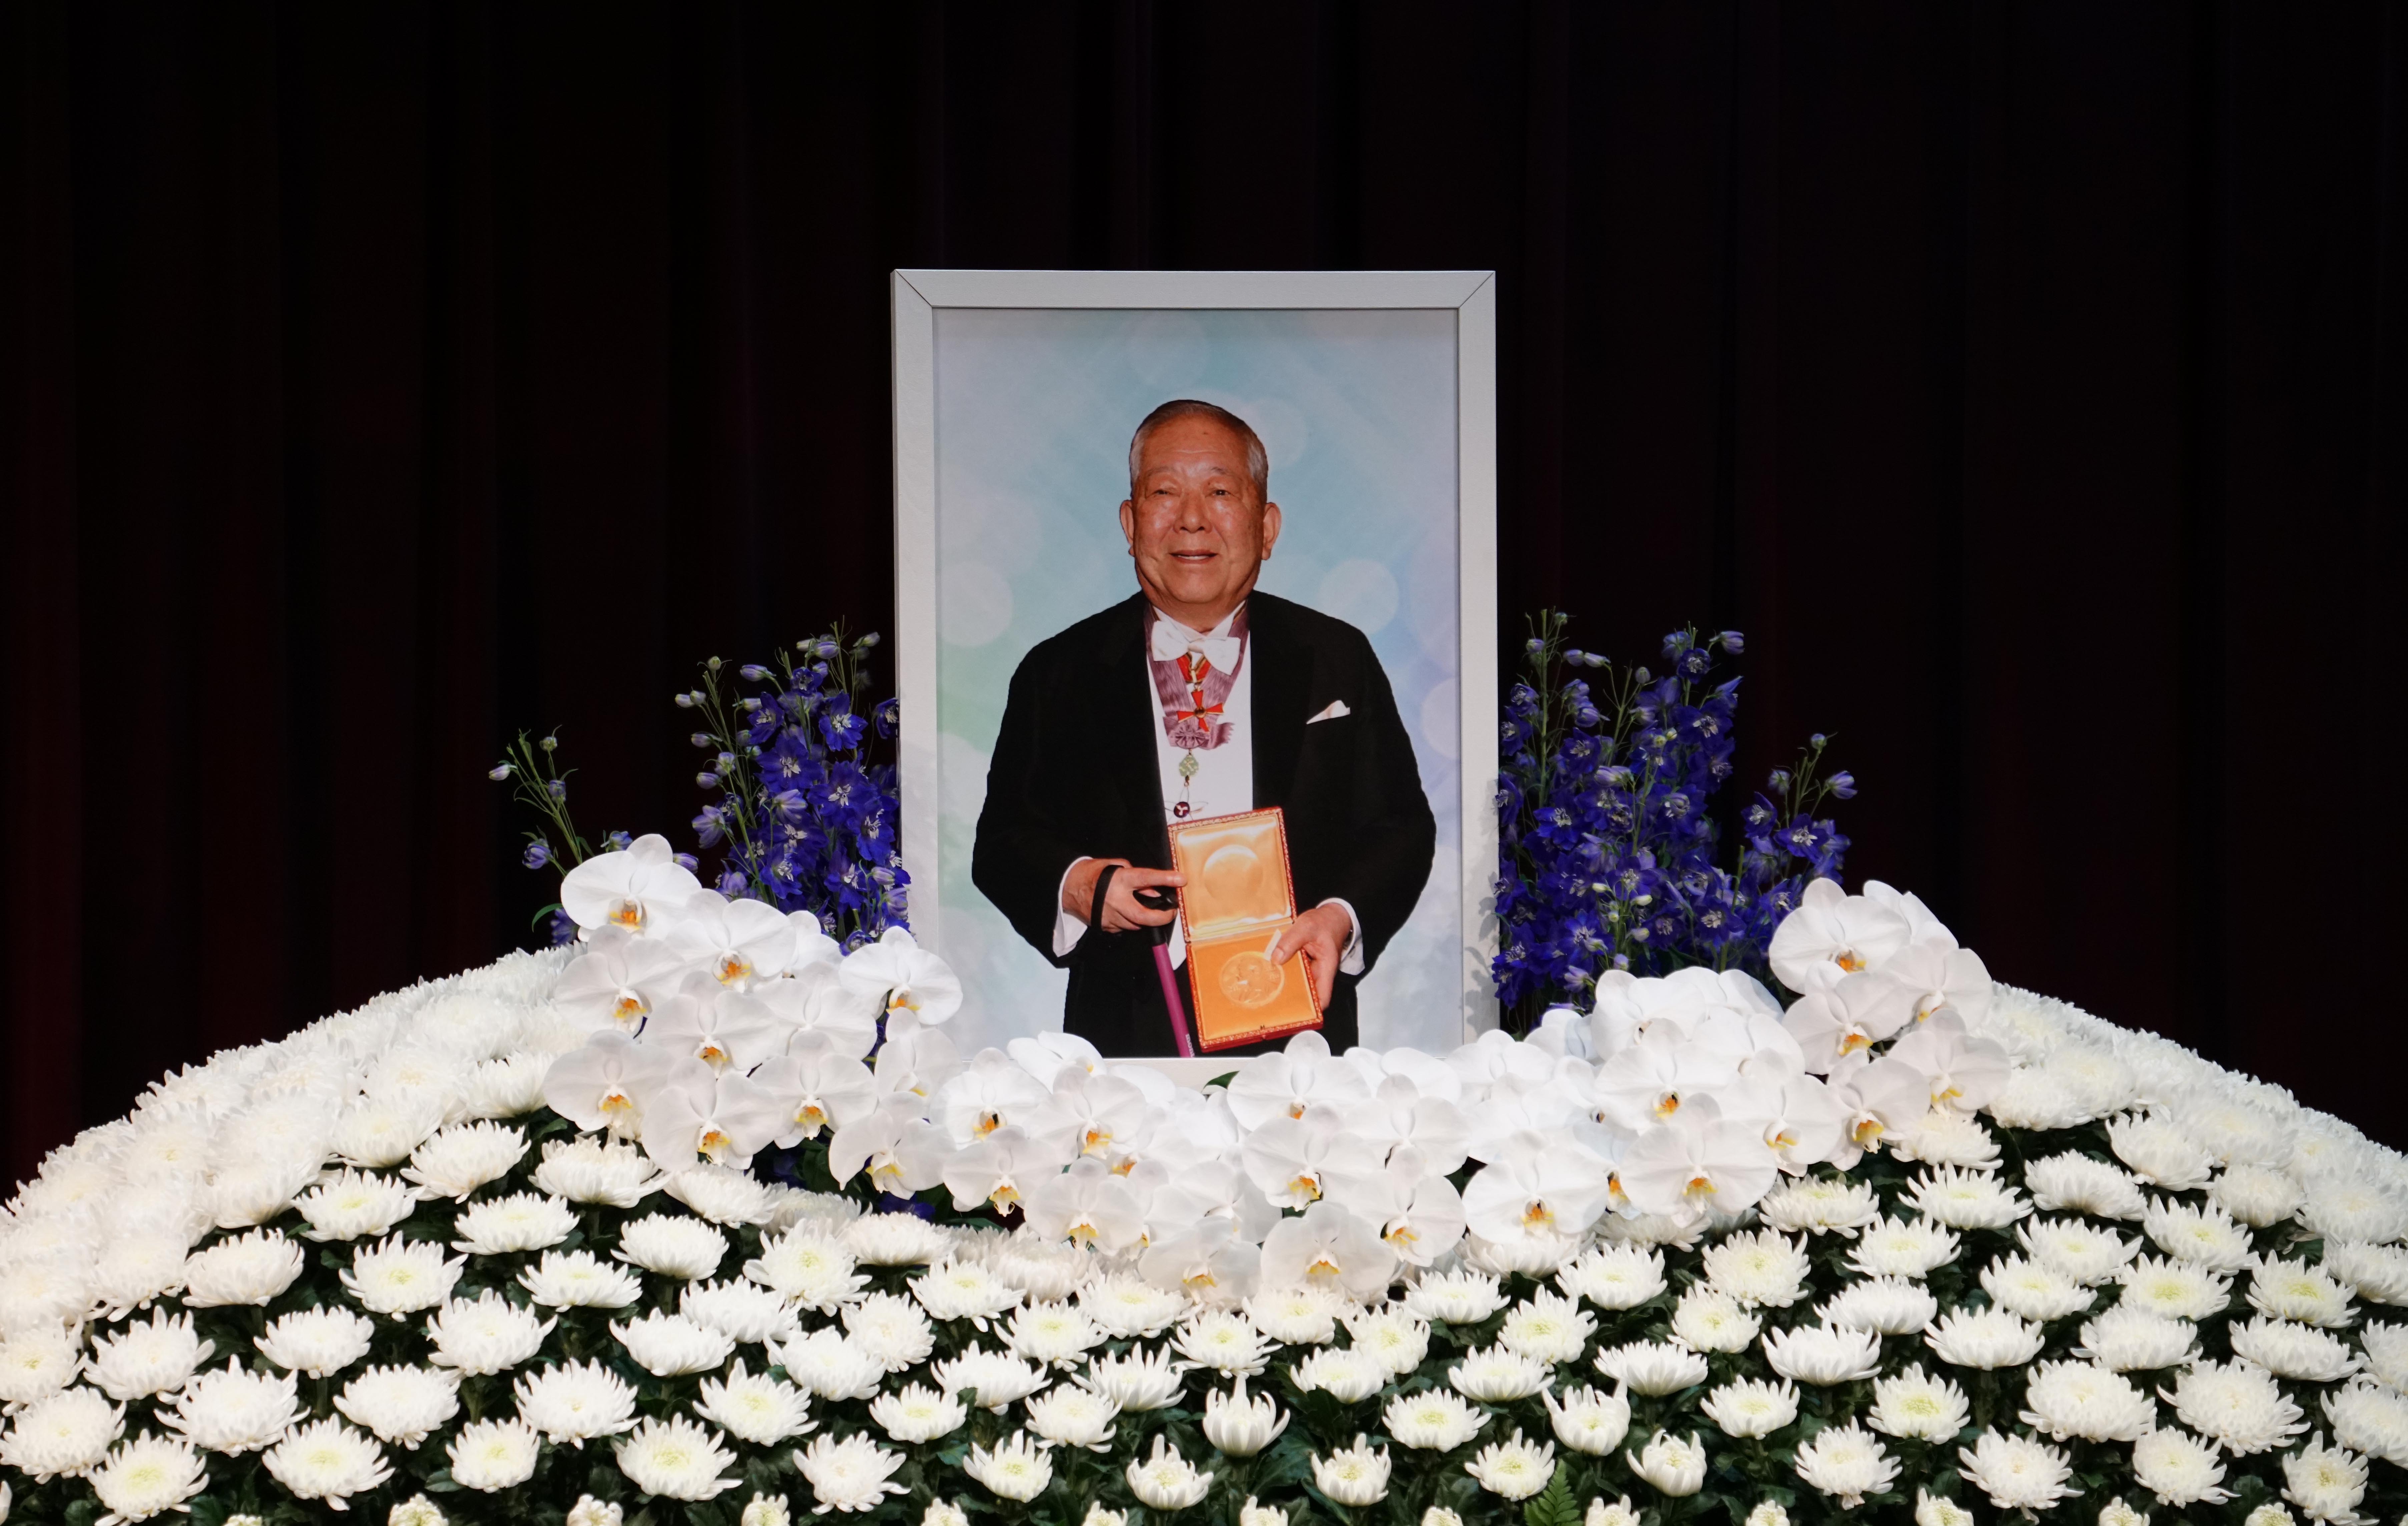 A memorial service for Dr. Masatoshi Koshiba was held, and his disciples shared their memories.